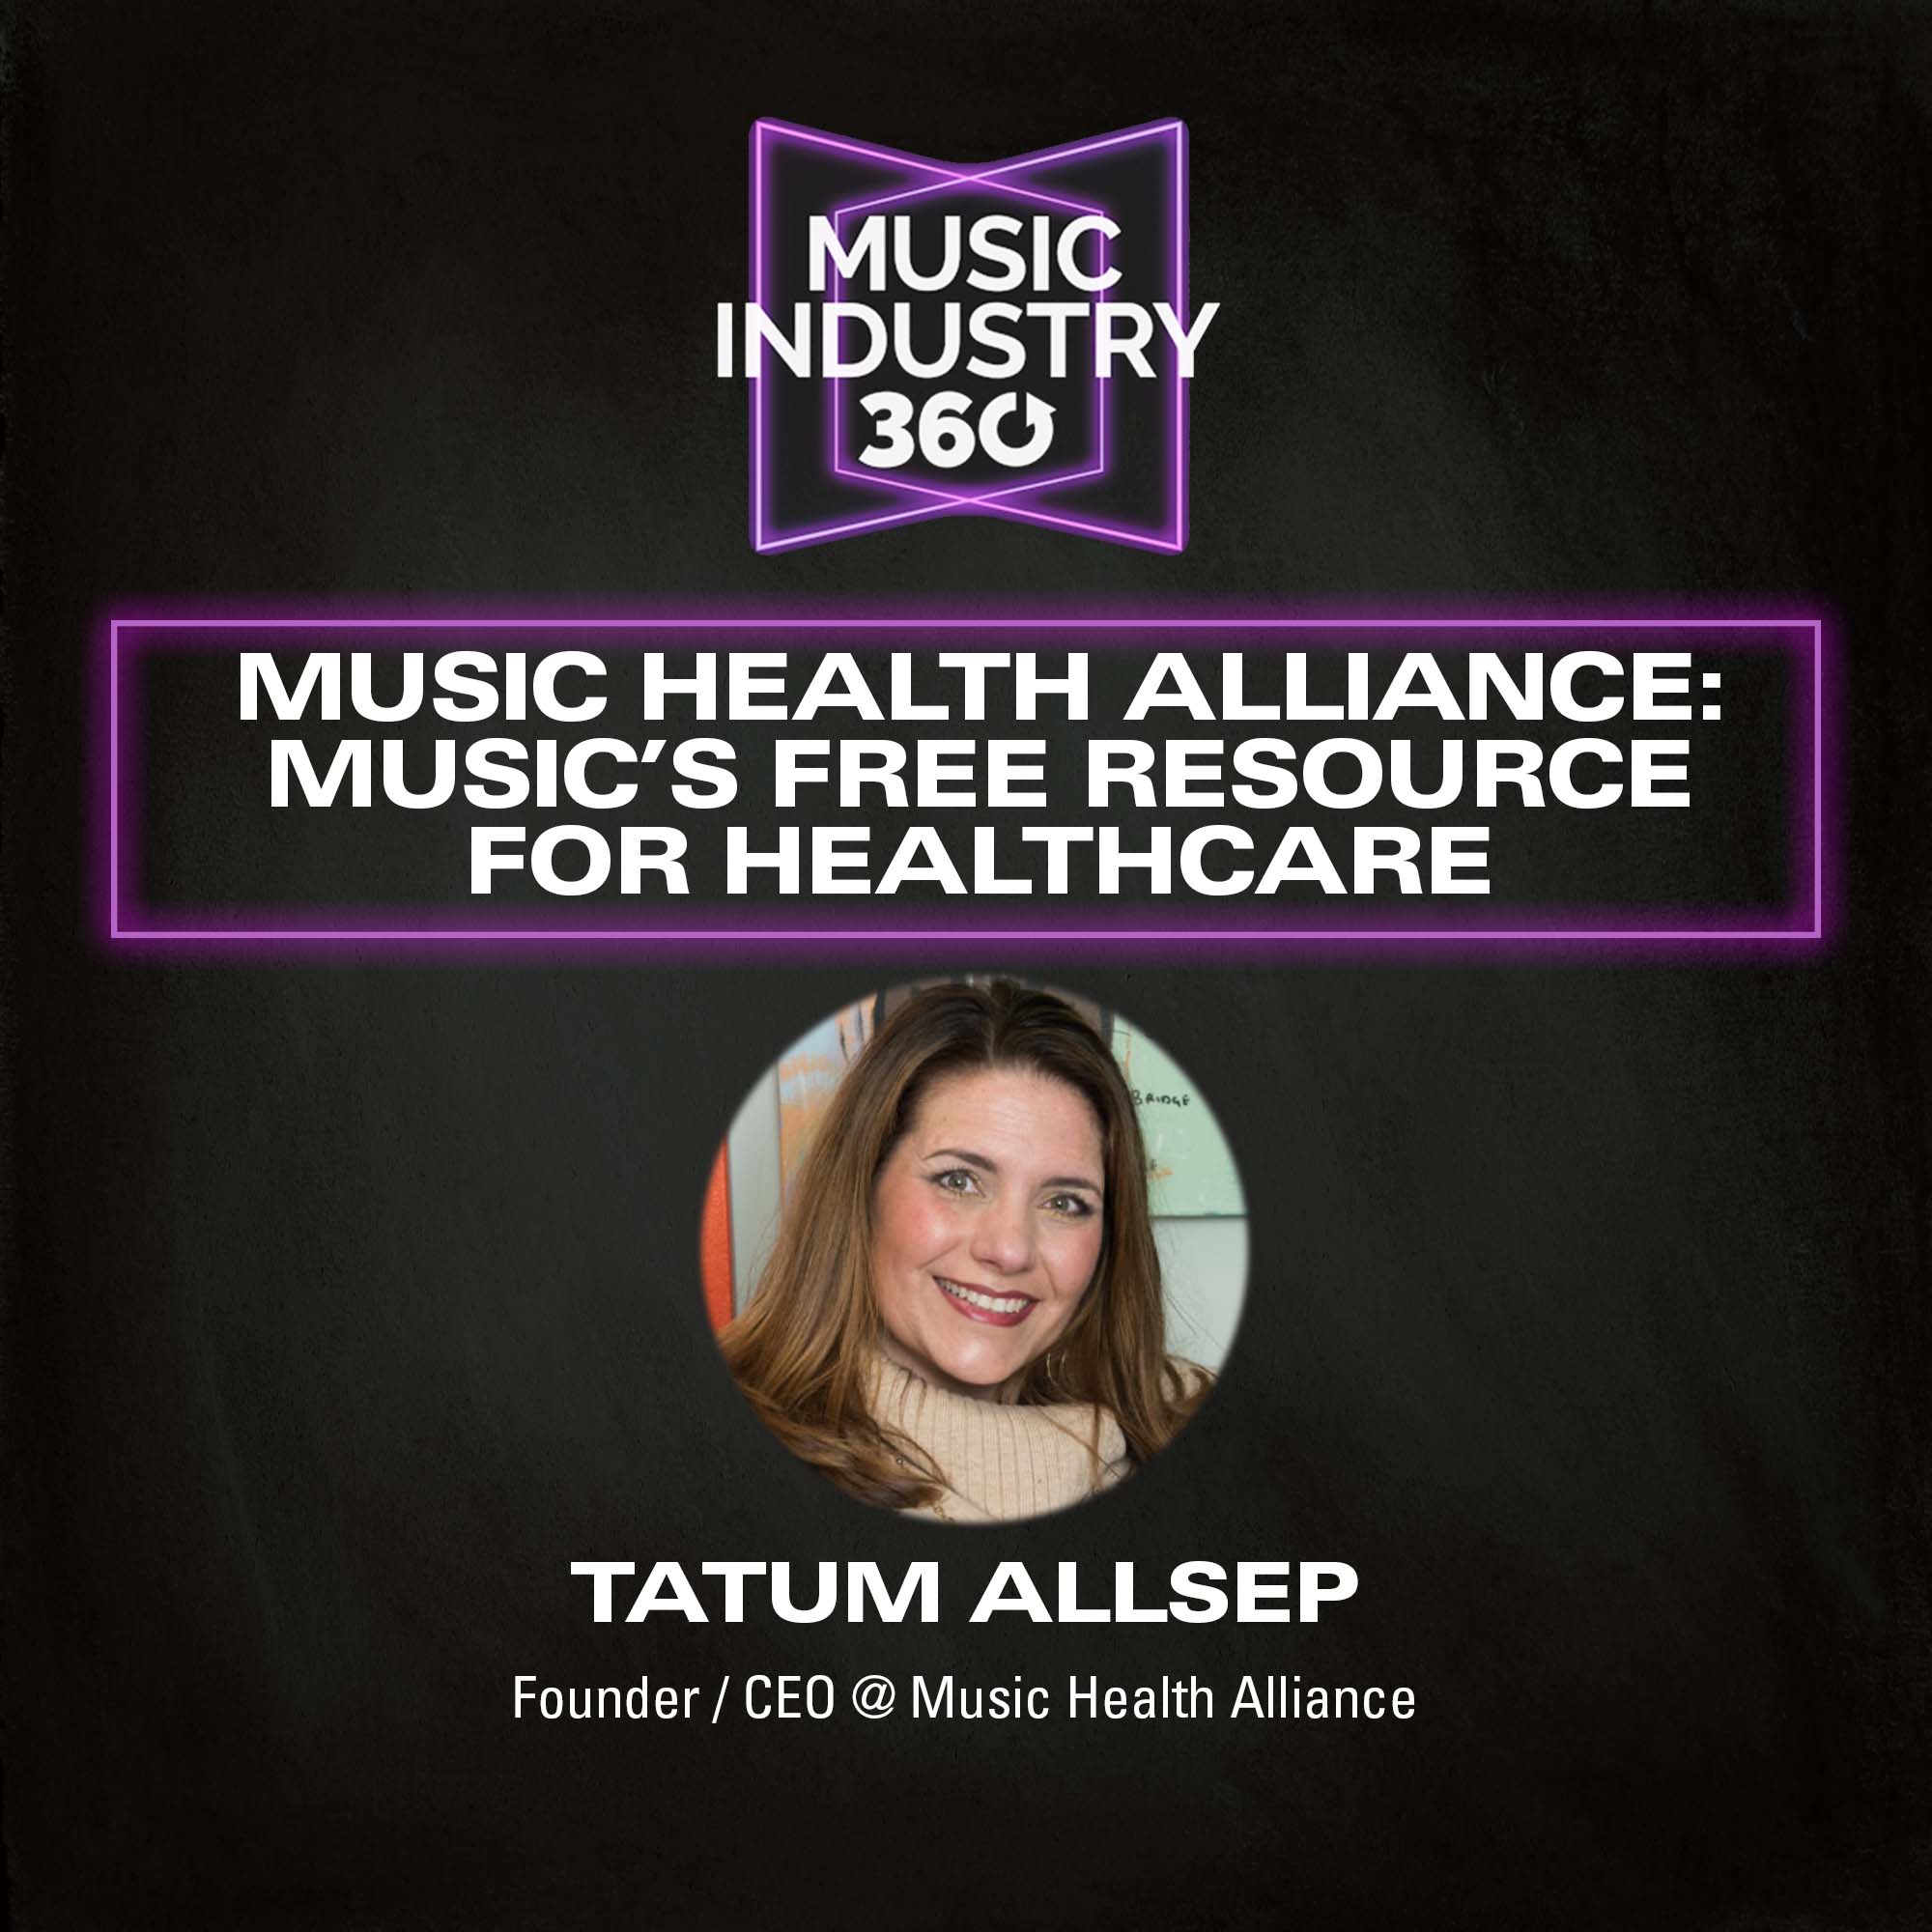 Music Health Alliance: Music’s Free Resource for Healthcare | Music Industry 360 Podcast